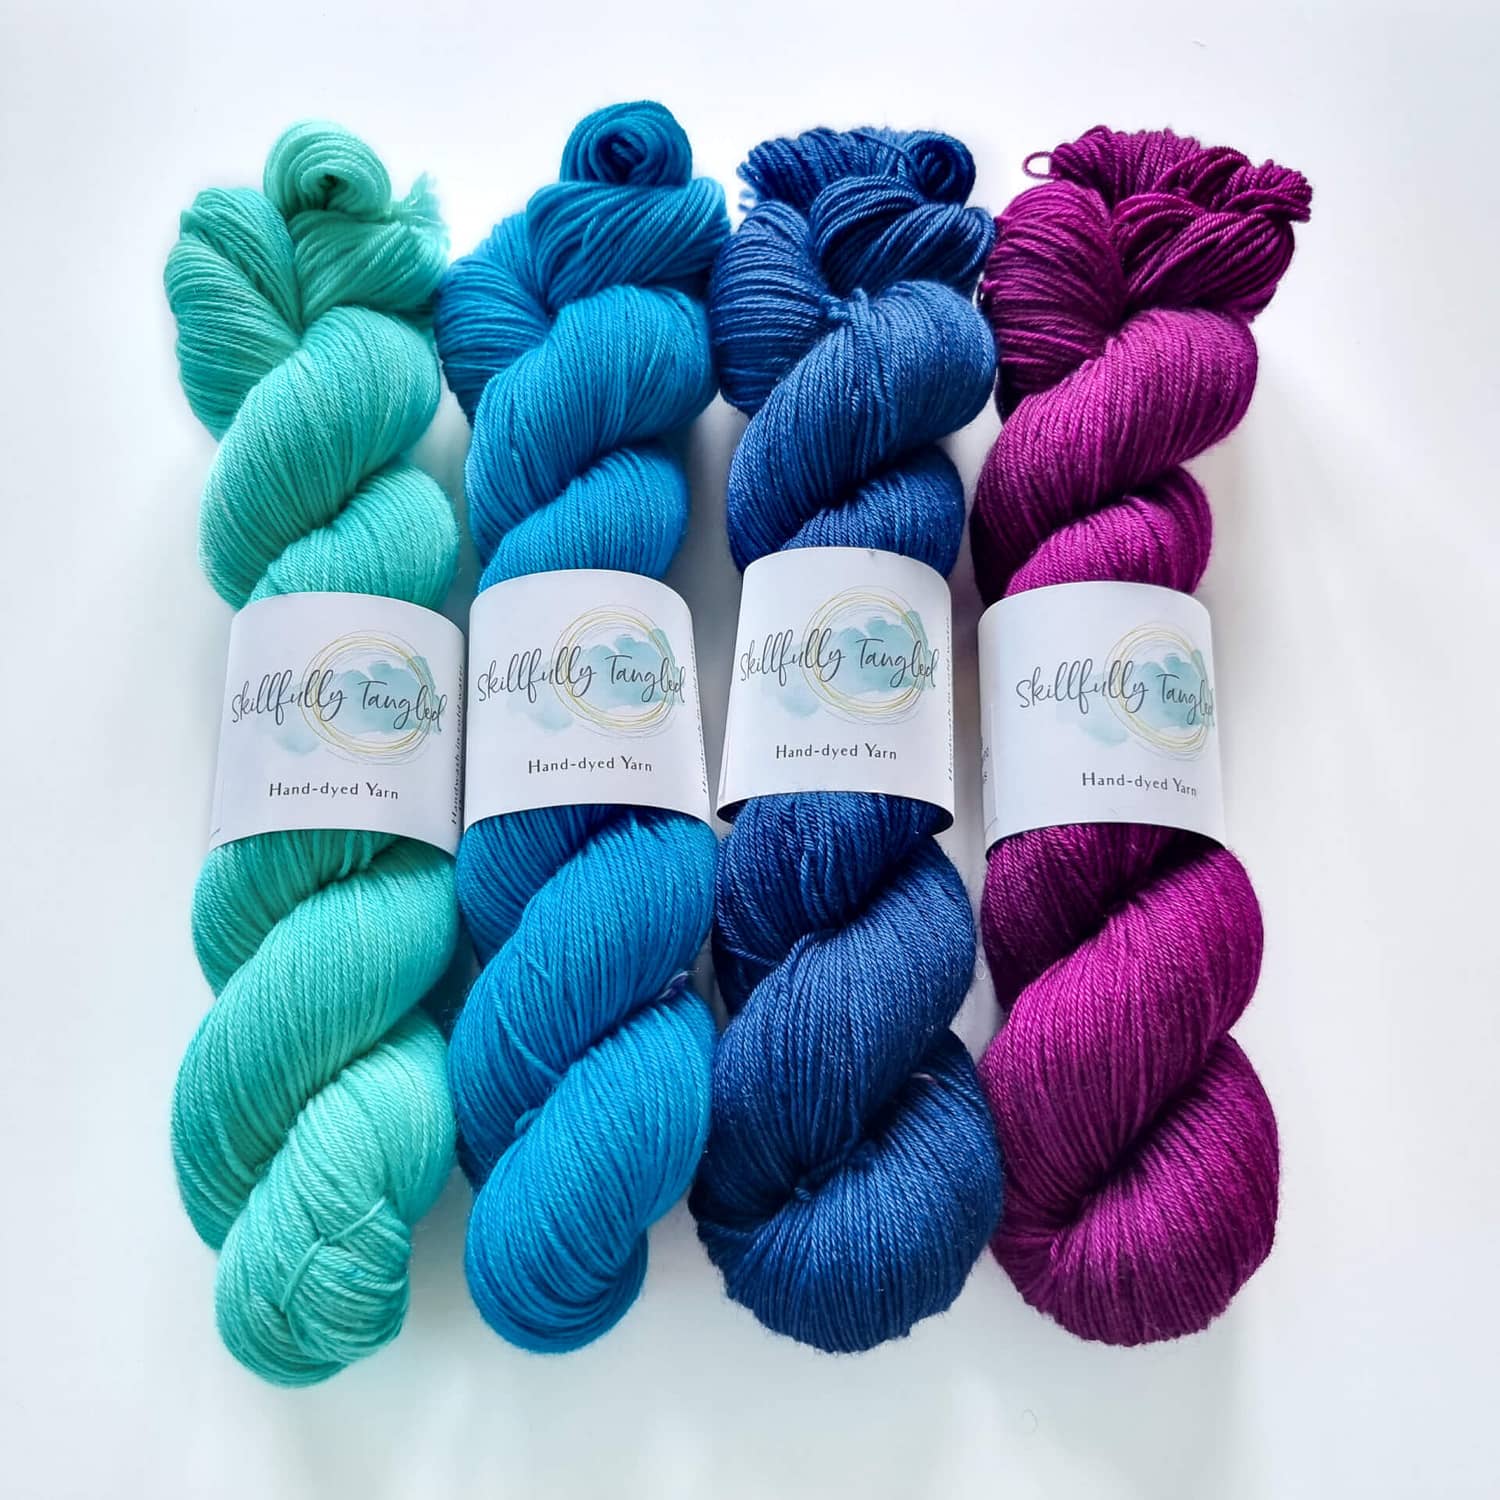 Four skeins of hand dyed merino yarn in light blue, turquoise, indigo and purple. They are a kit for the Geogradient MKAL